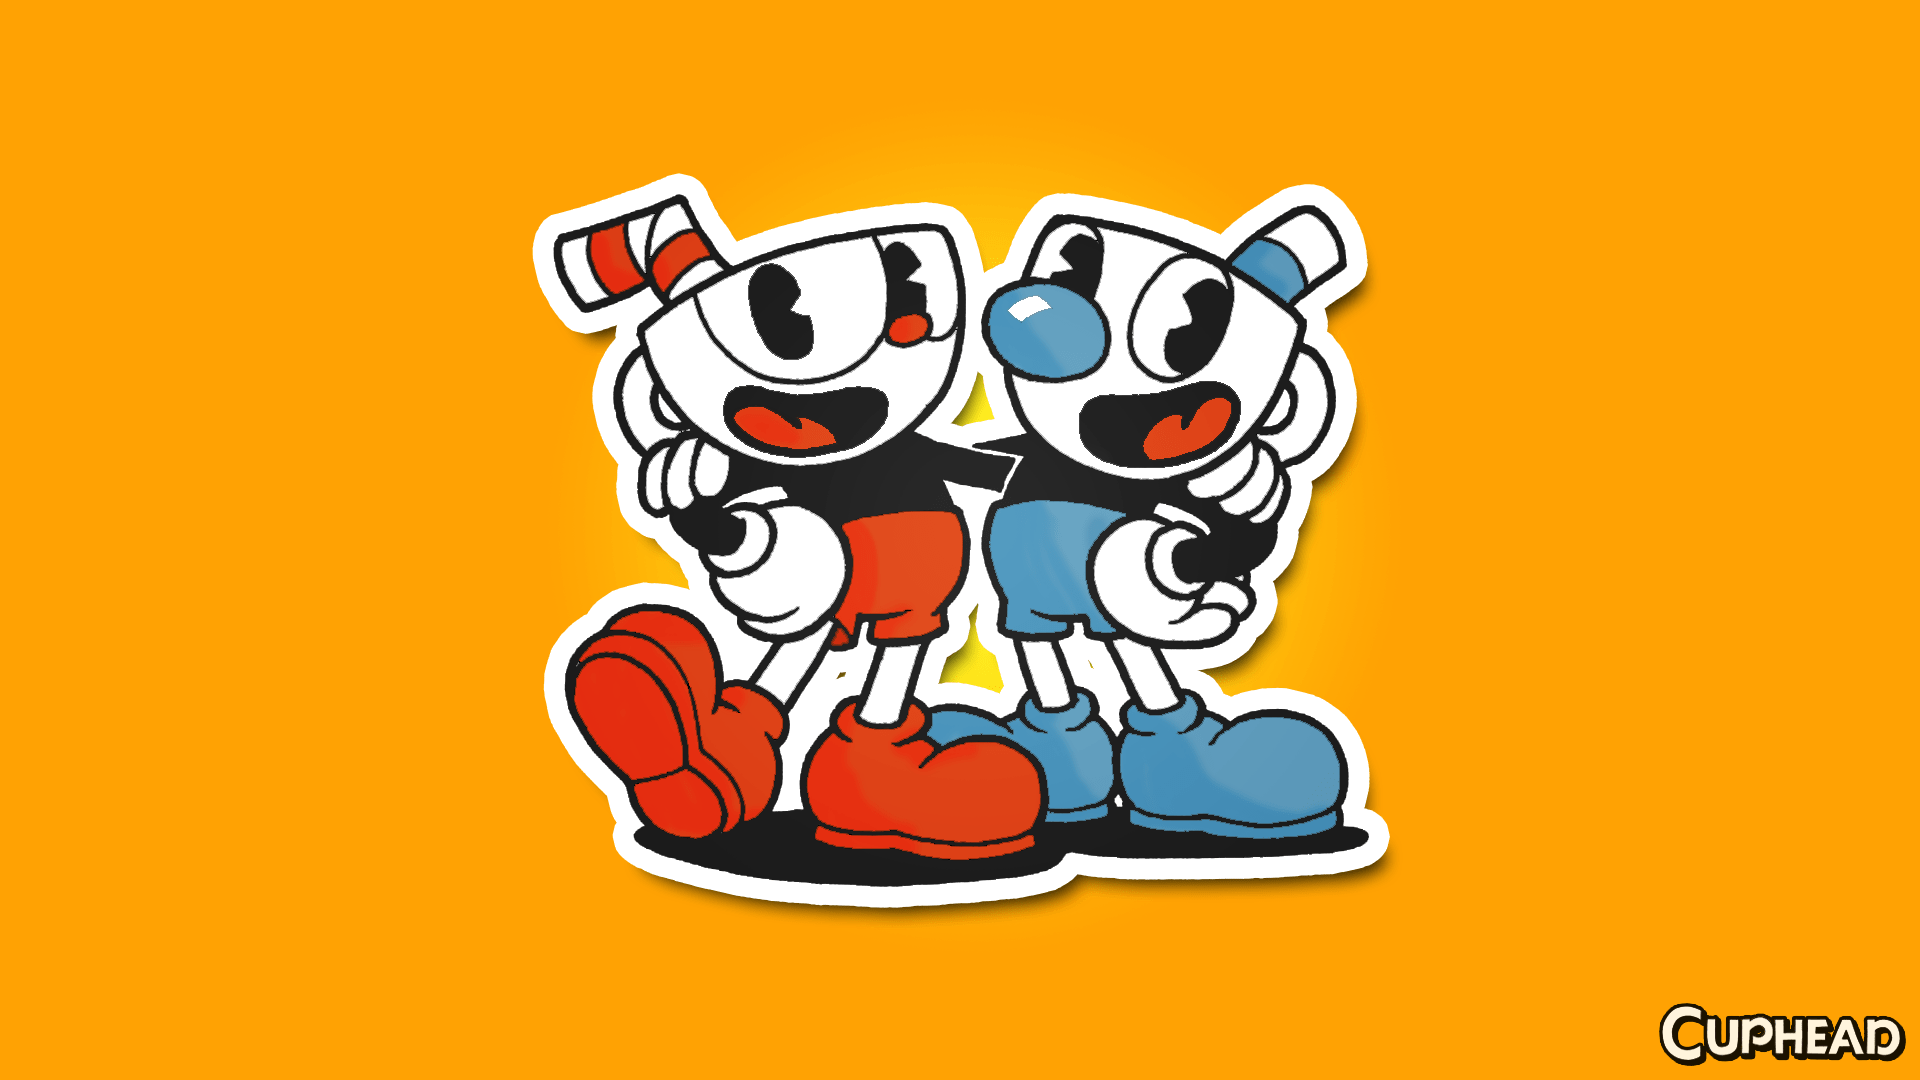 cuphead for windows 10 free download